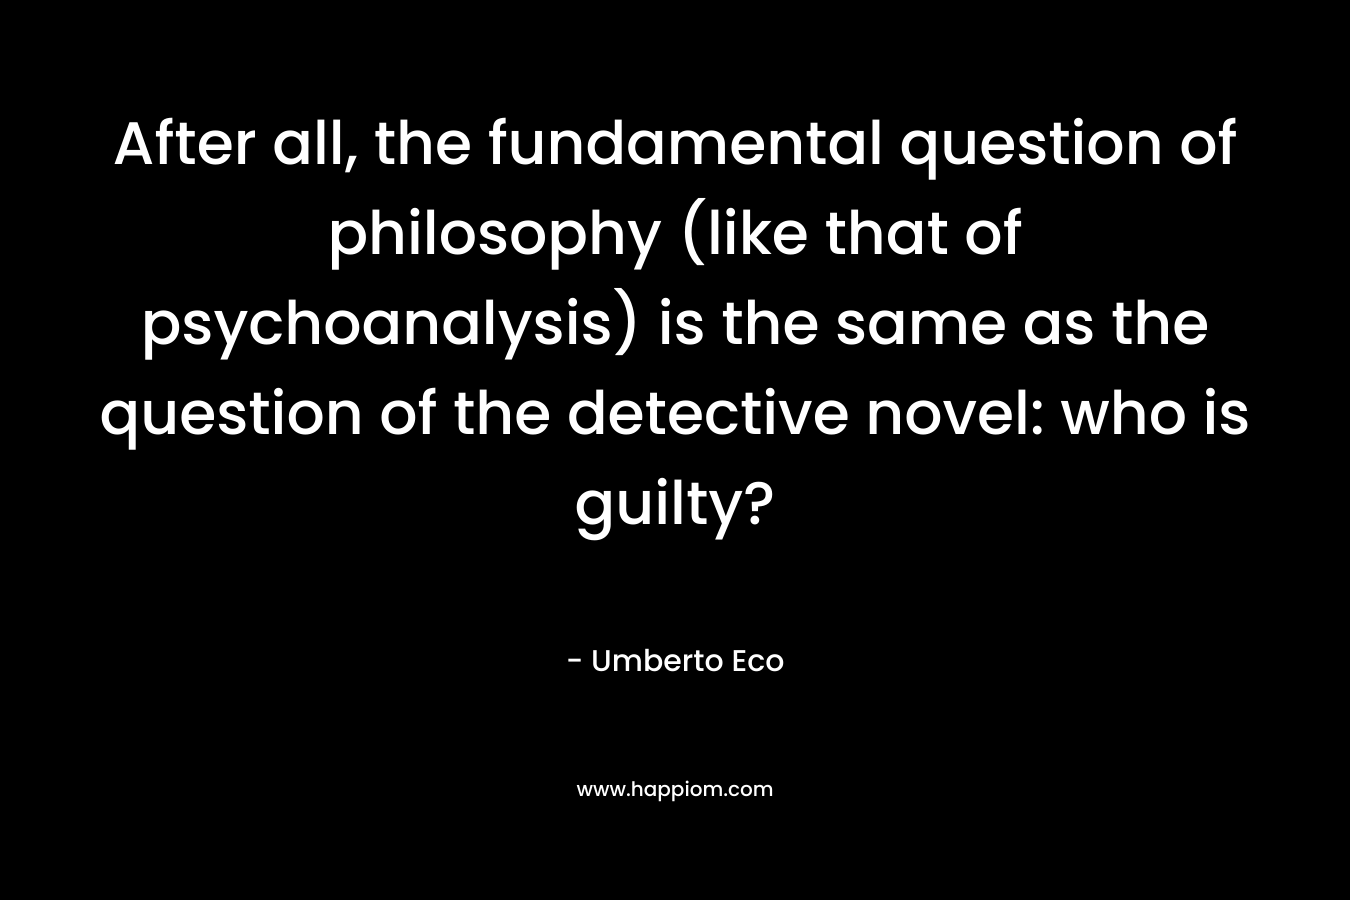 After all, the fundamental question of philosophy (like that of psychoanalysis) is the same as the question of the detective novel: who is guilty? – Umberto Eco